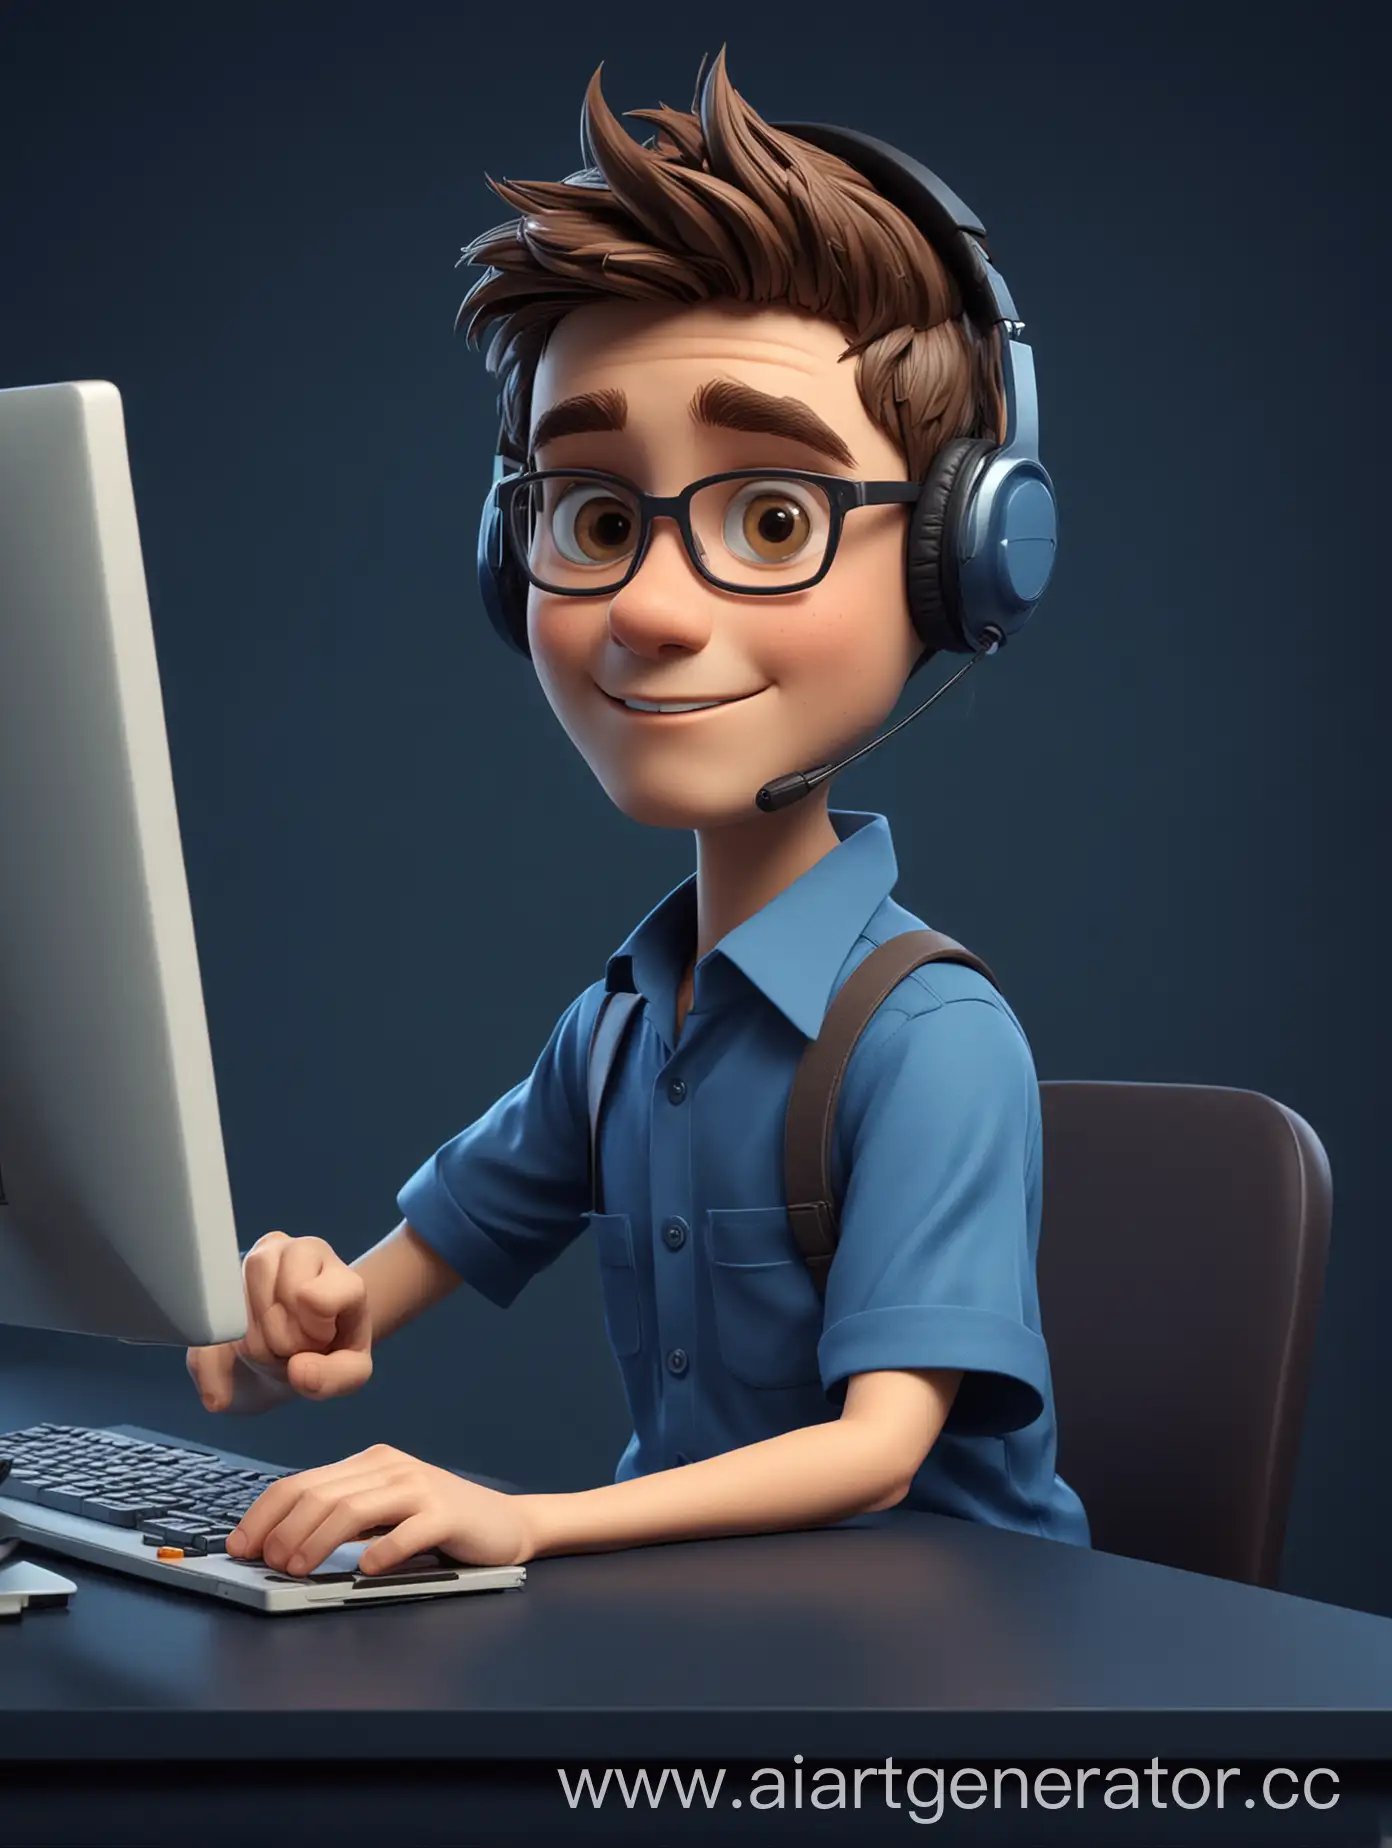 Customer-Service-Specialist-Cartoon-Character-Boy-at-Computer-with-Headset